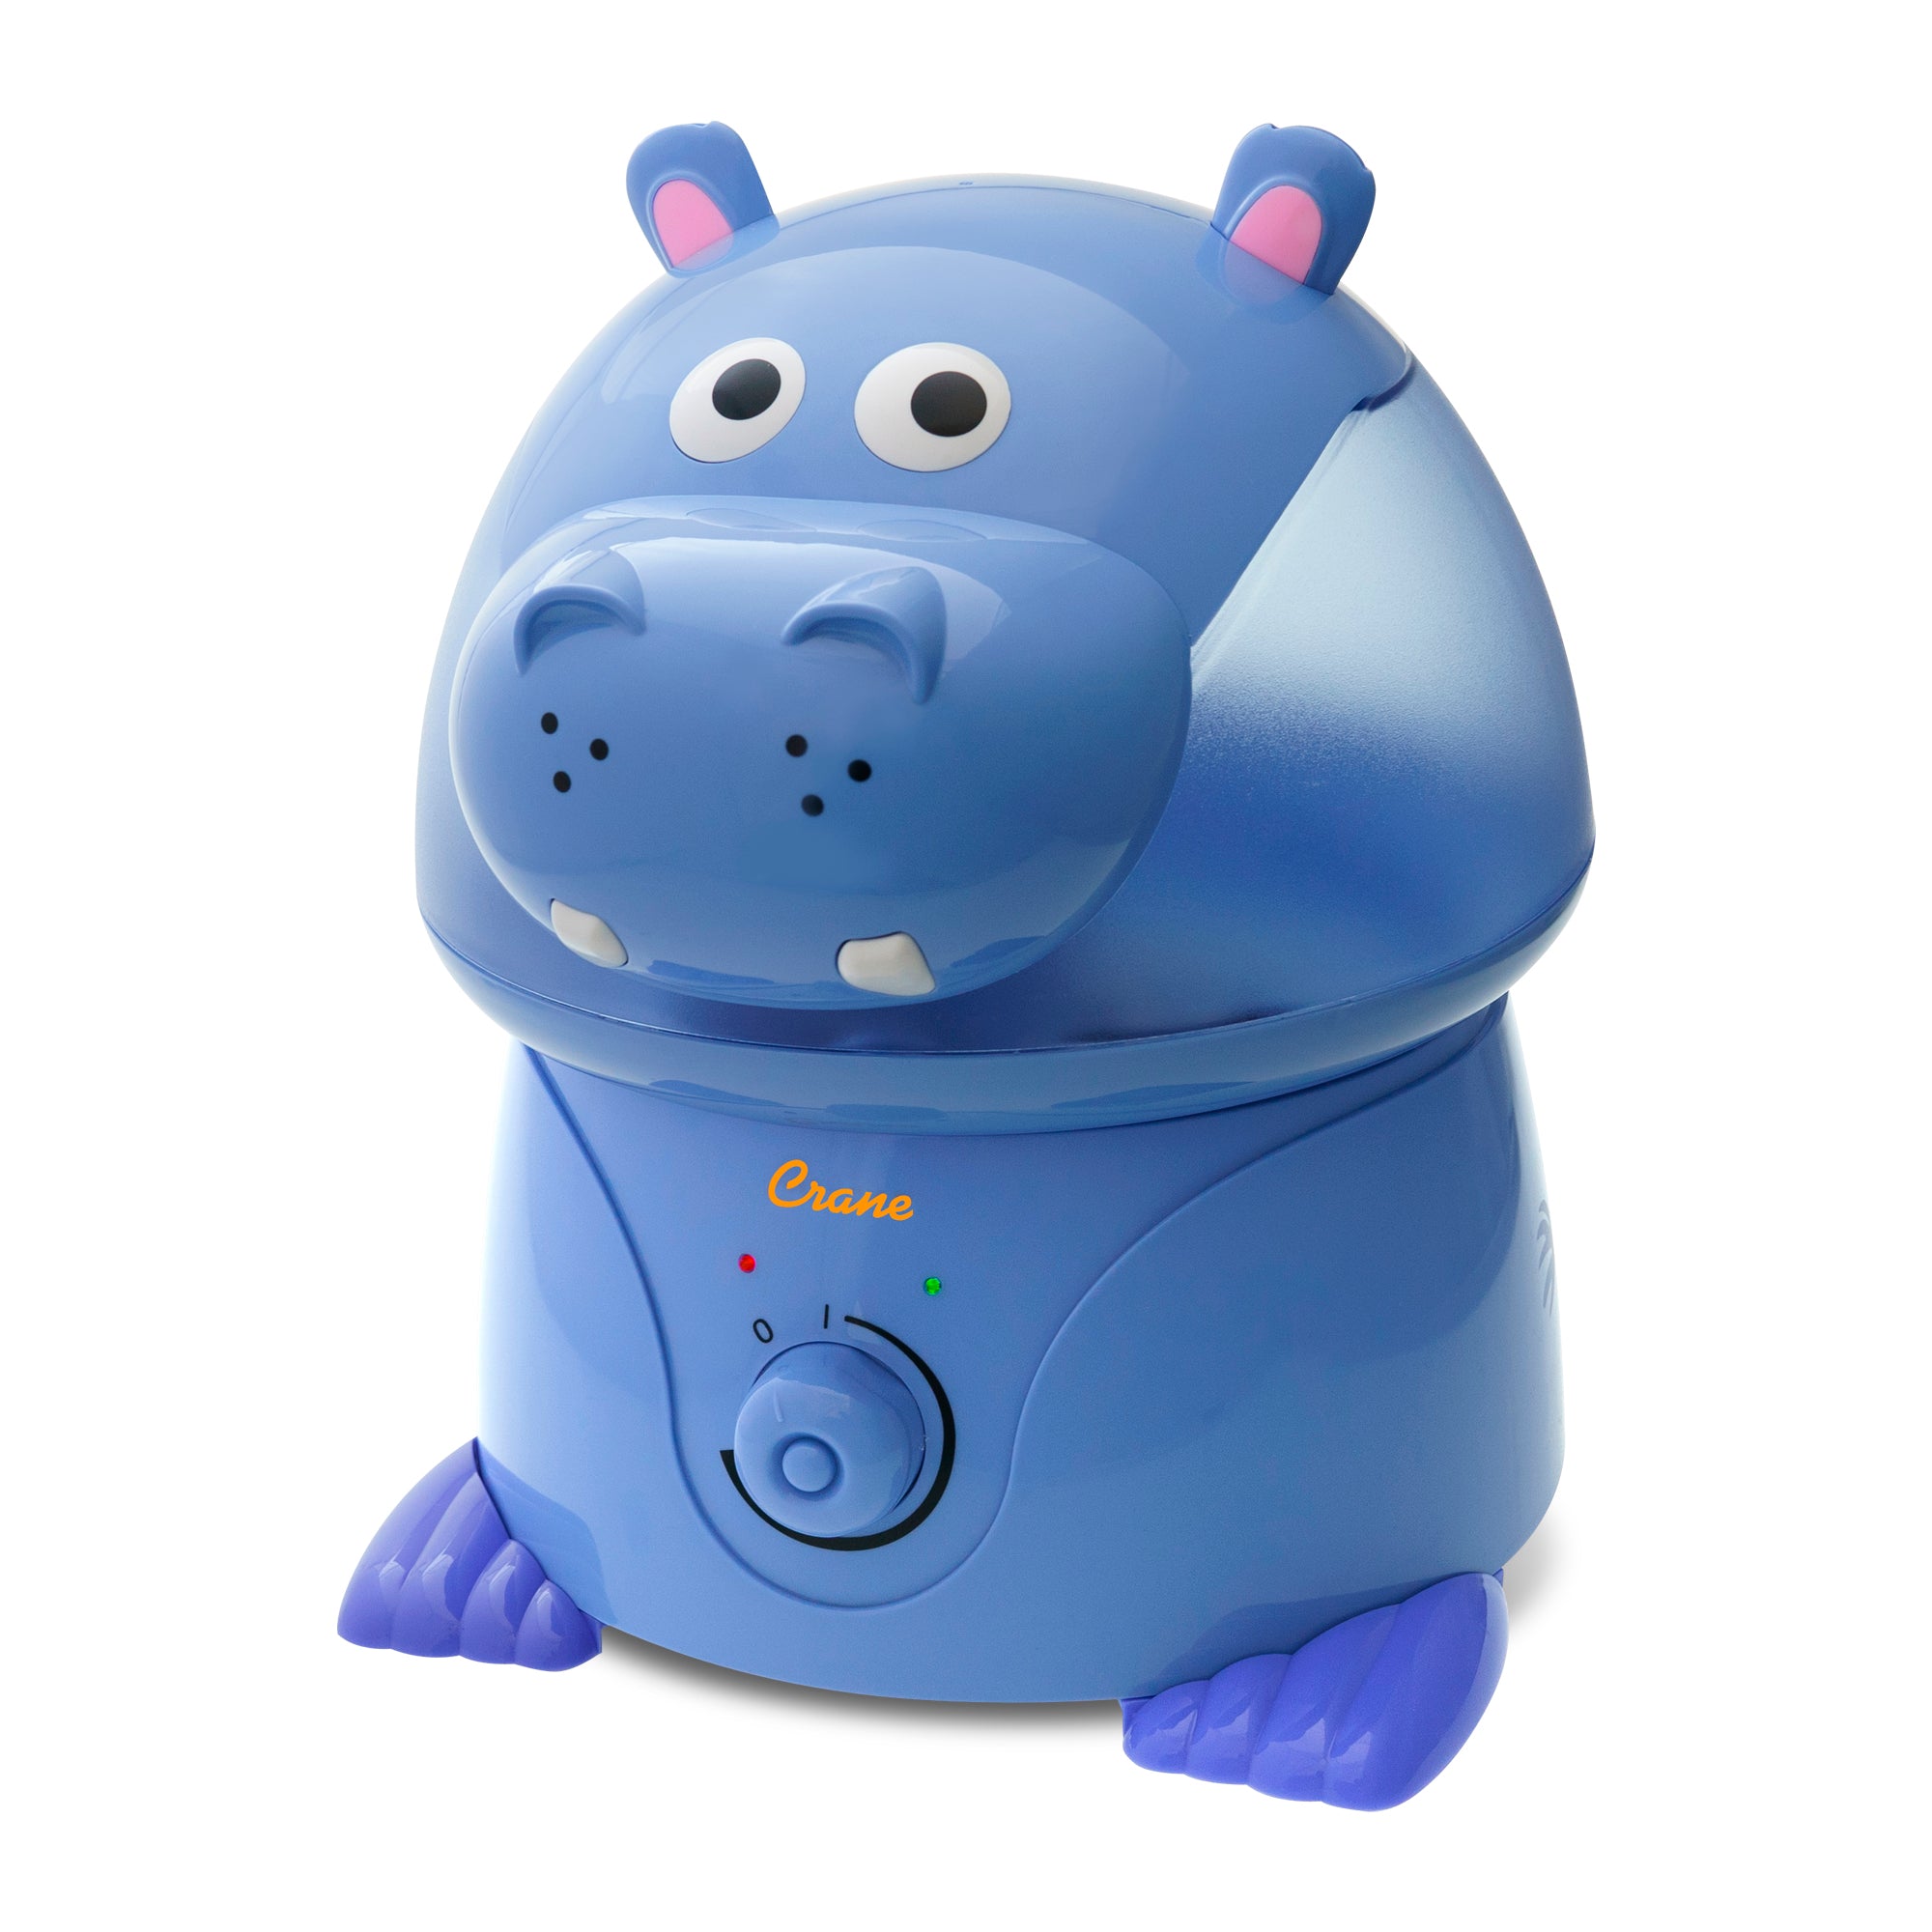 Violet the Hippo Cool Mist Humidifier